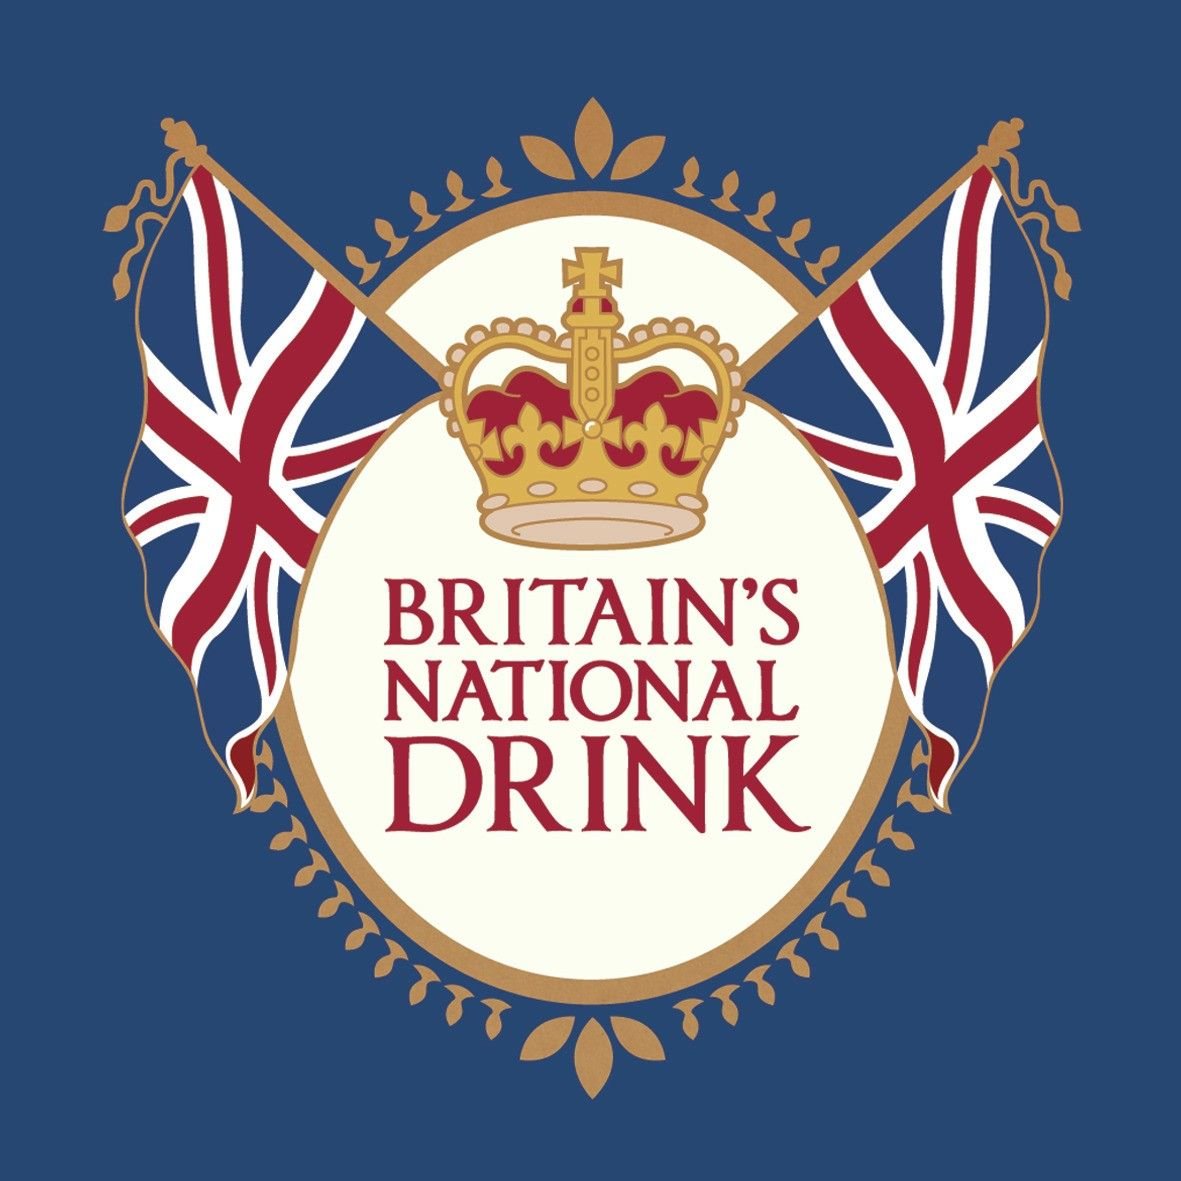 Britain’s national drink